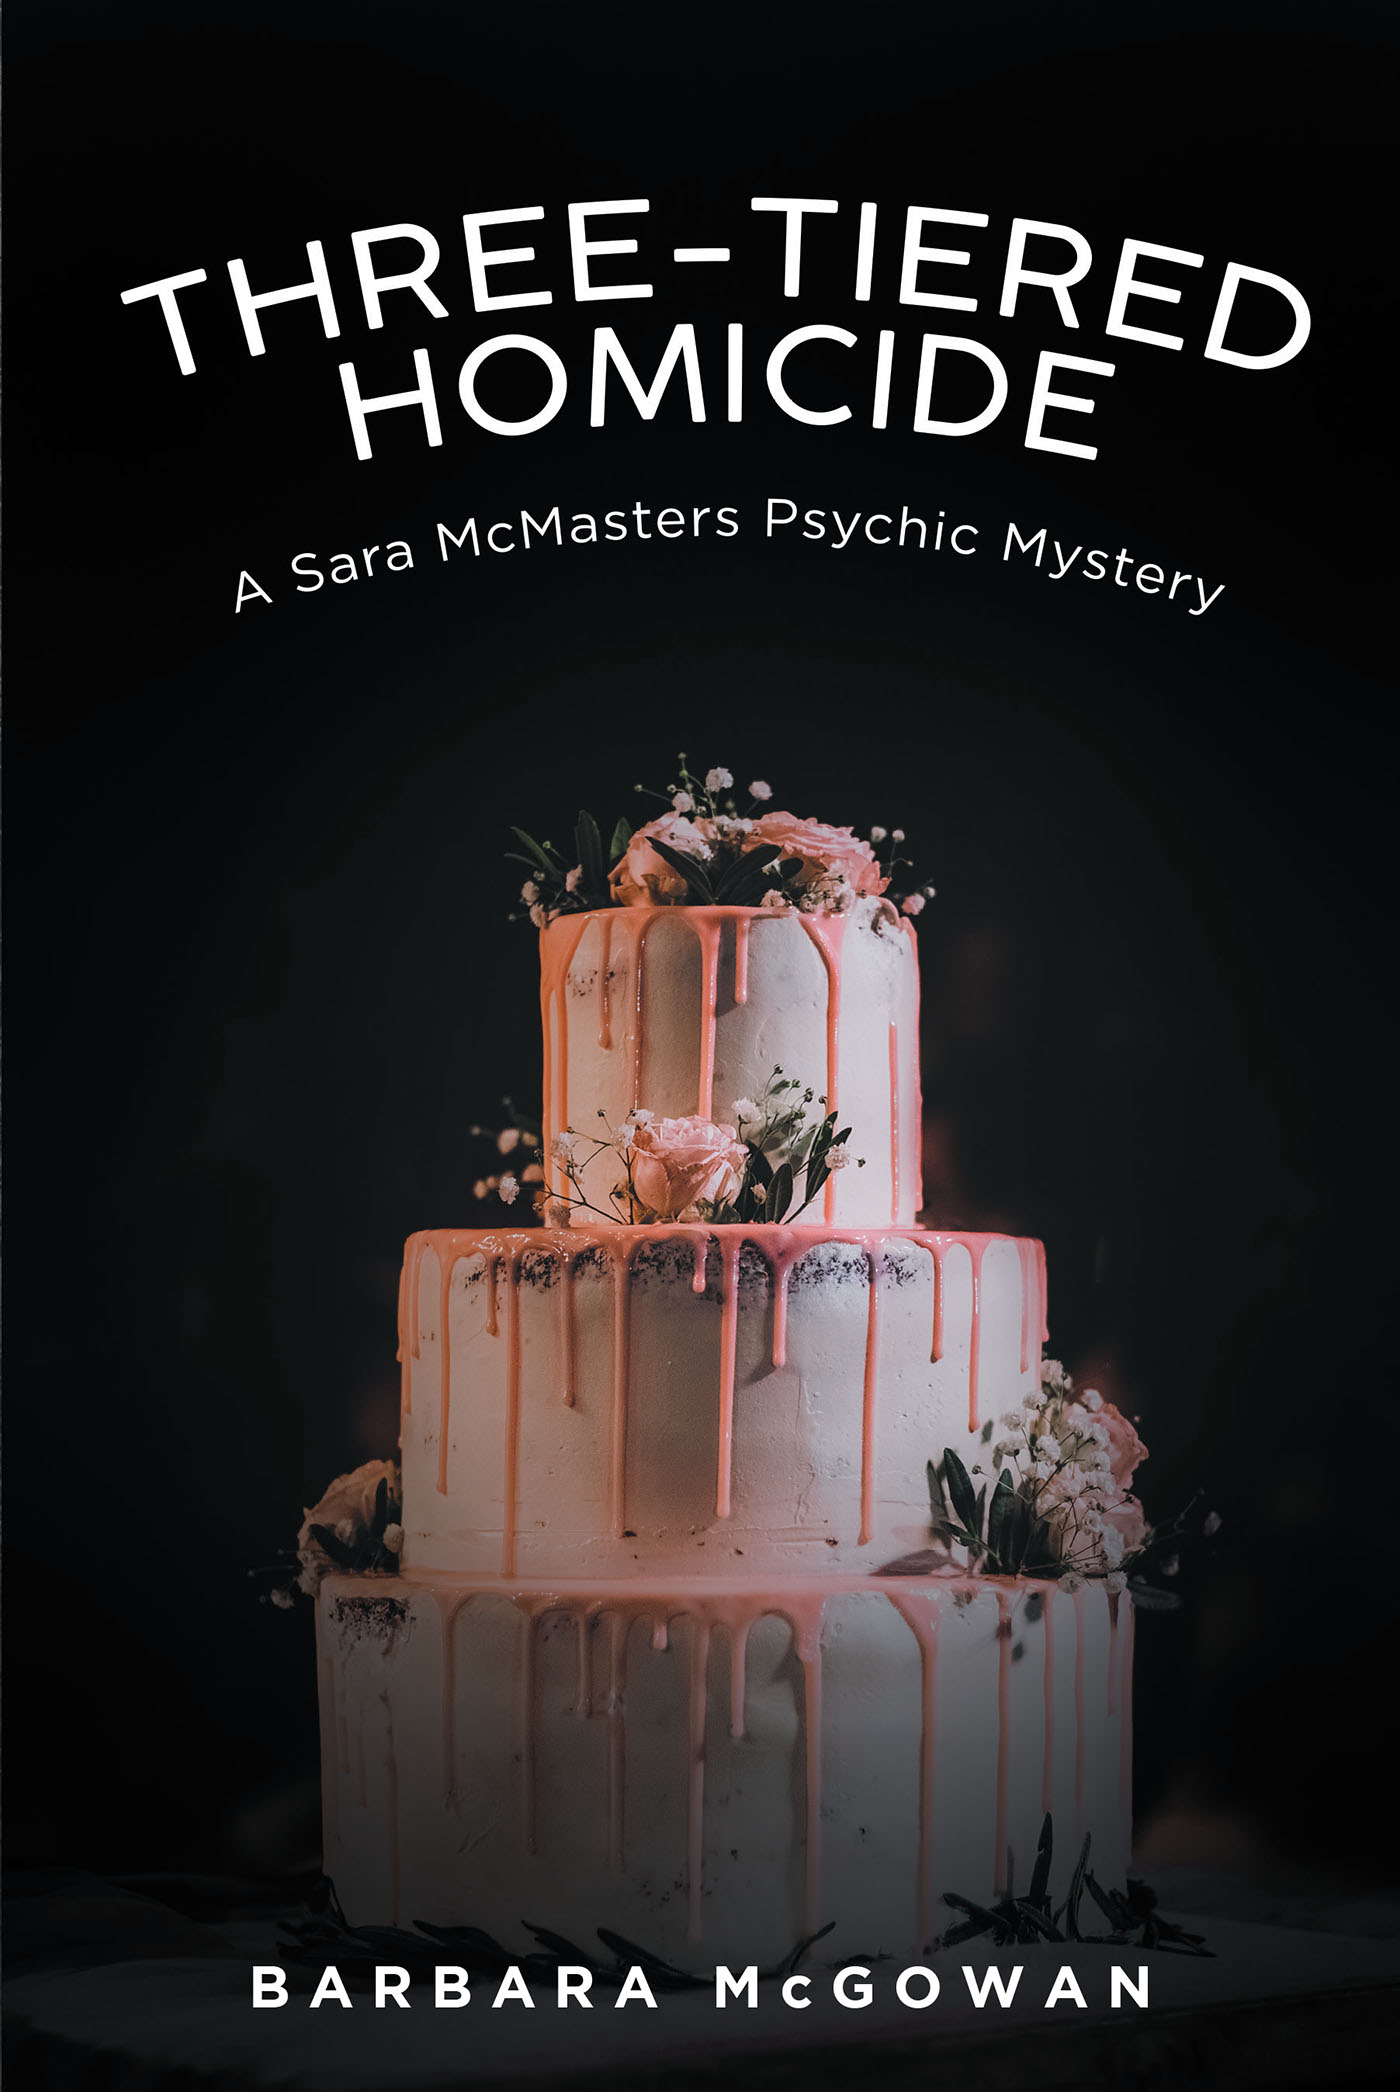 Barbara McGowan’s New Book, “Three-Tiered Homicide,” Follows a Forensic Psychologist & Psychic Who Gets Caught Up in a Mysterious Death While Celebrating a Wedding